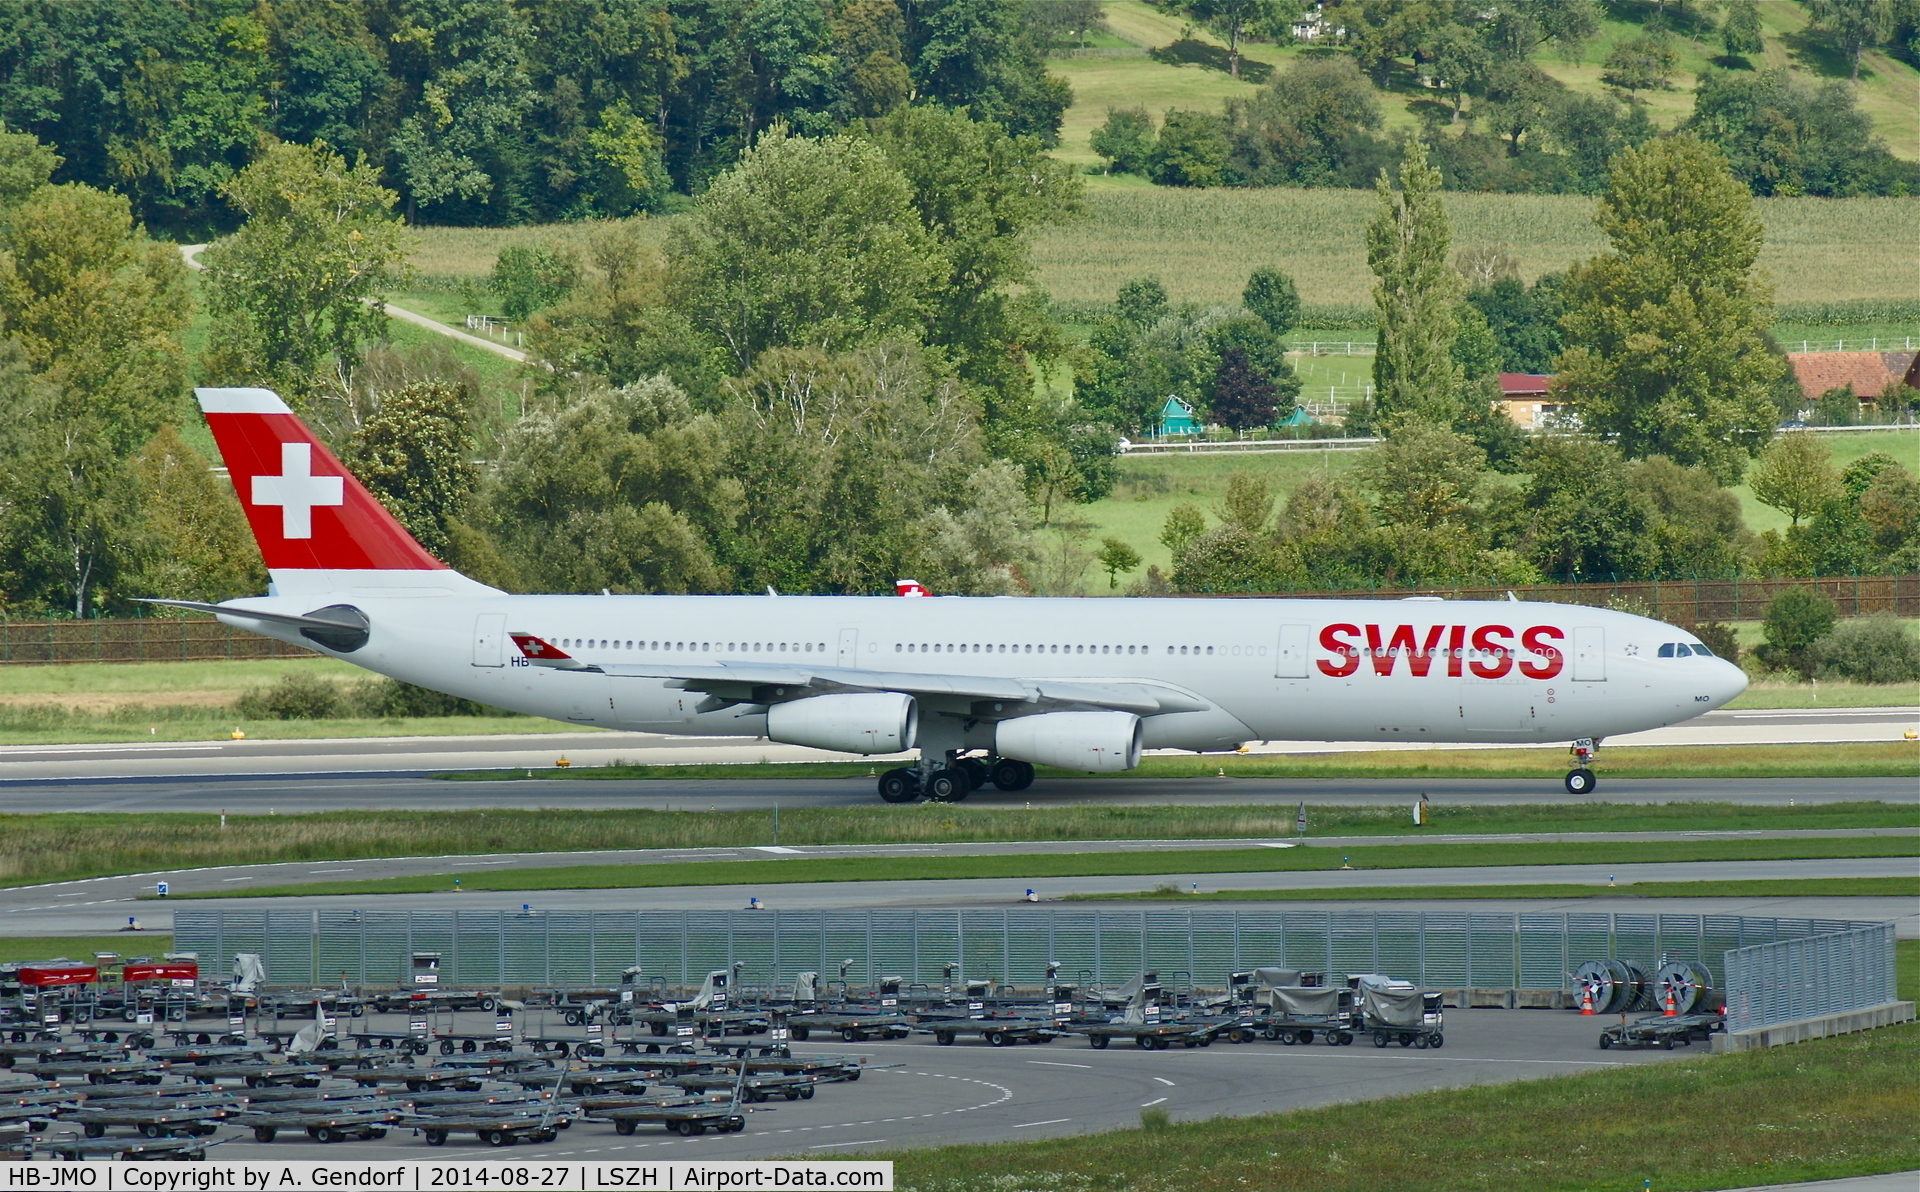 HB-JMO, 1997 Airbus A340-313 C/N 179, Swiss, is here taxiing at Zürich-Kloten(LSZH)